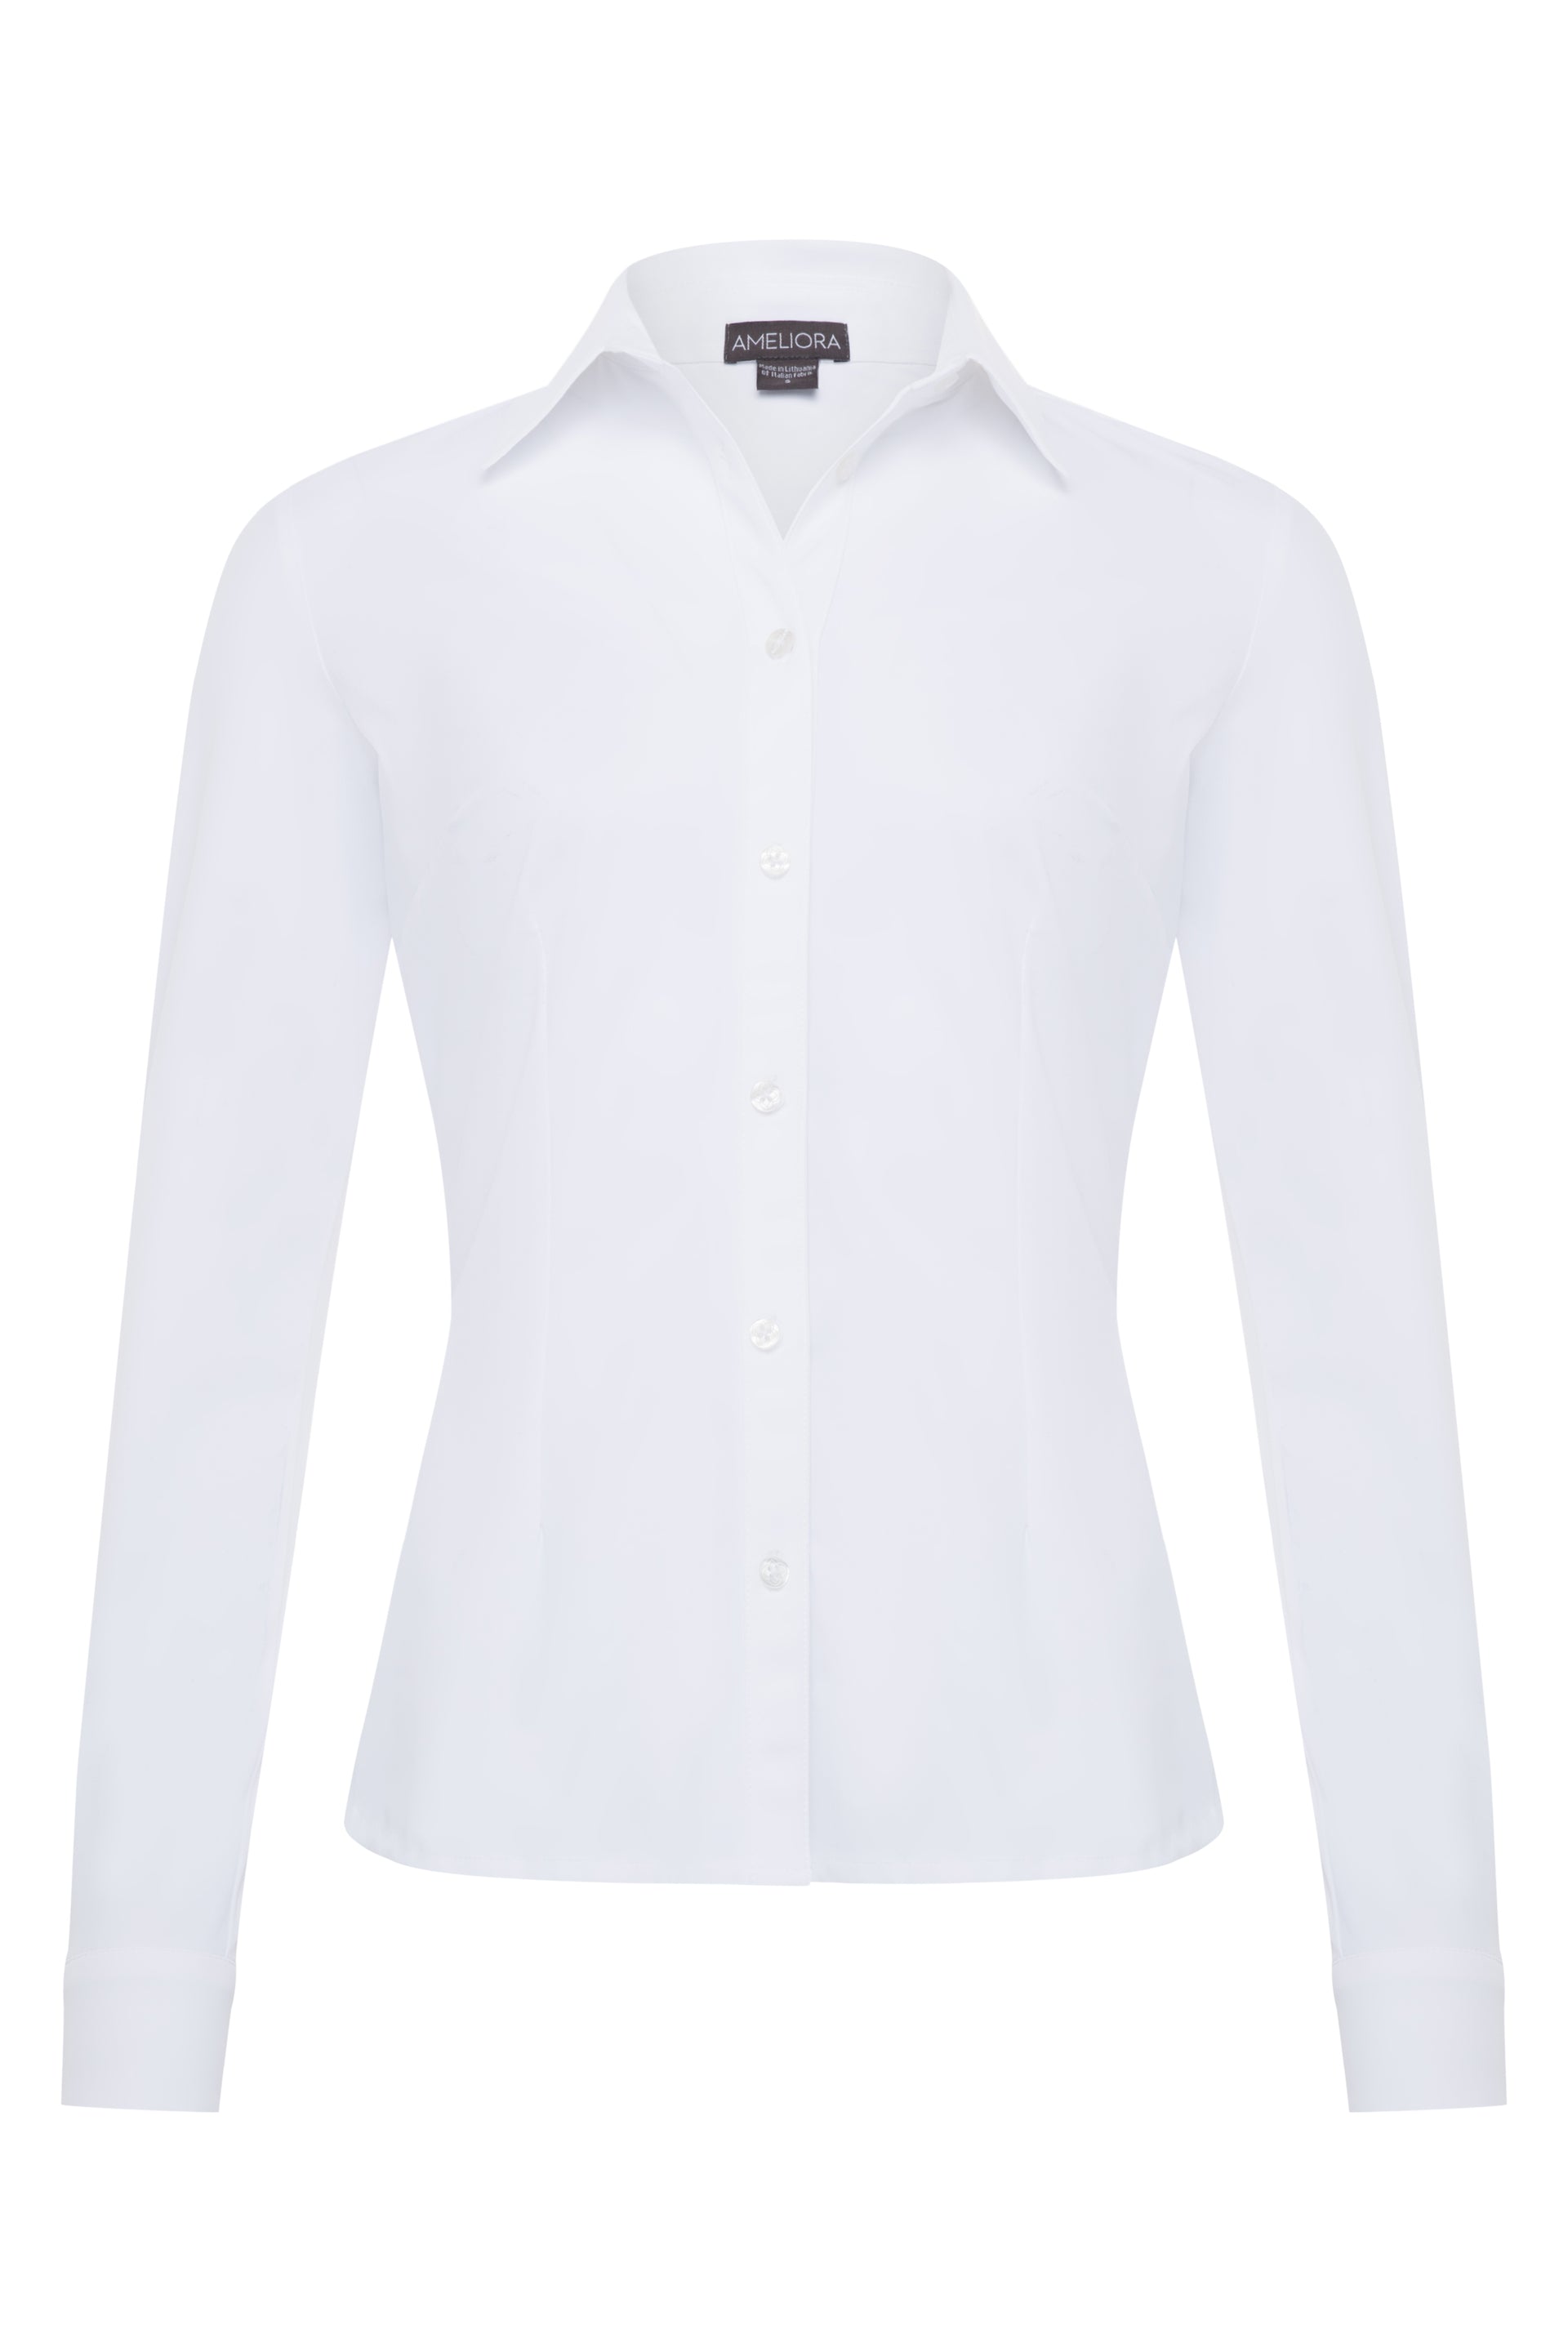 Buy Shirts For Women at Ameliora - Order Online